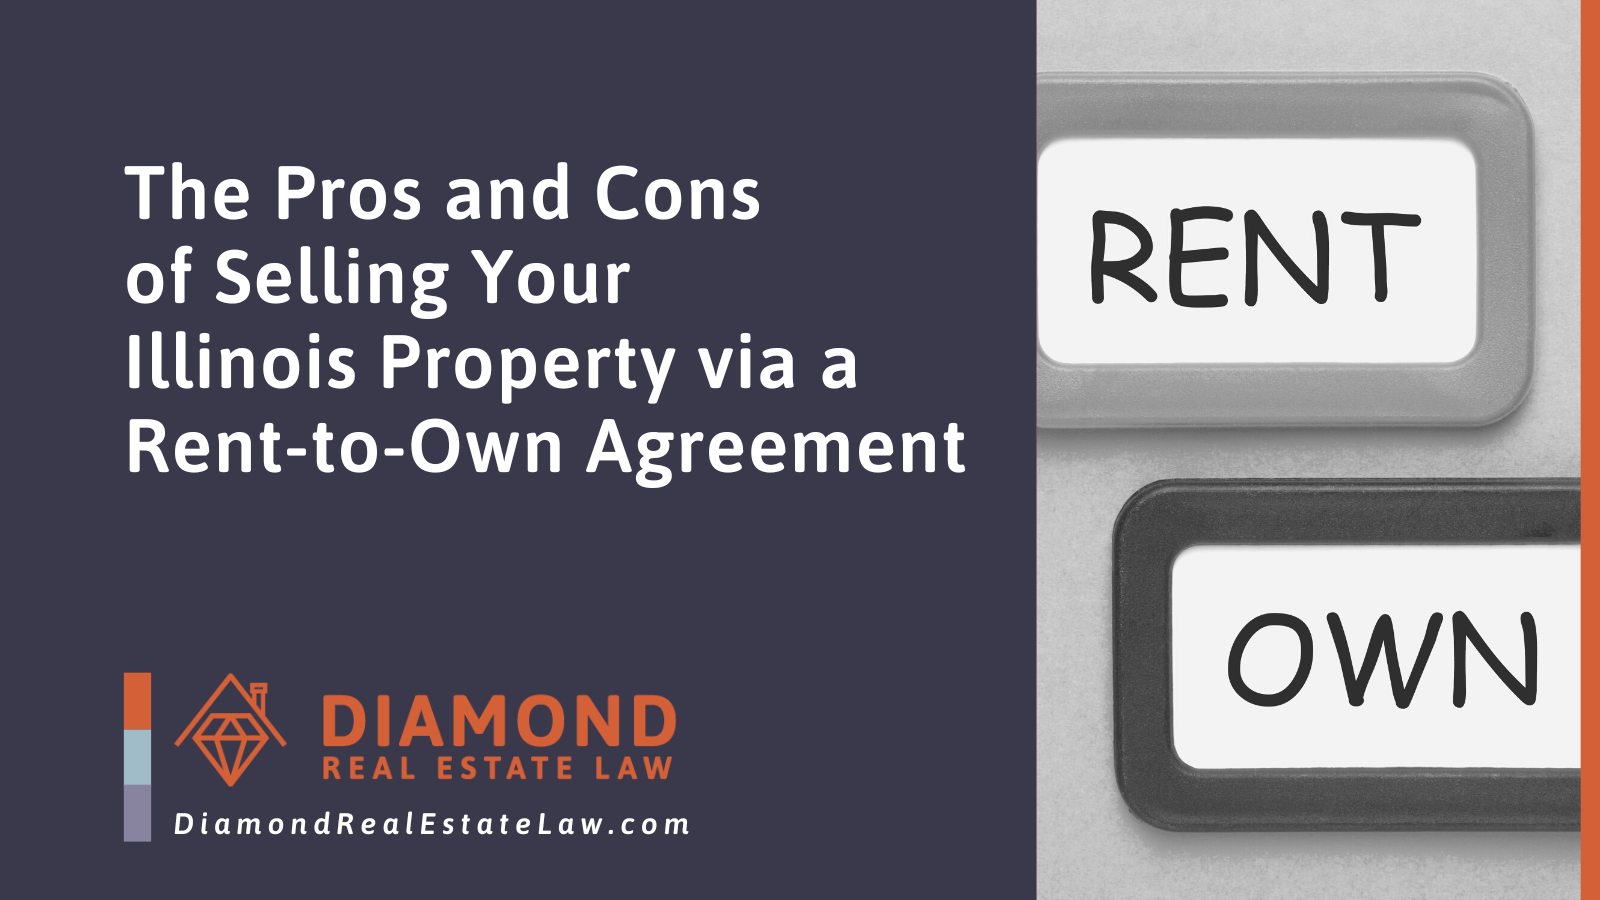 The Pros and Cons of Selling Your Illinois Property via a Rent-to-Own Agreement - Diamond Real Estate Law | McHenry, IL Residential Real Estate Lawyer